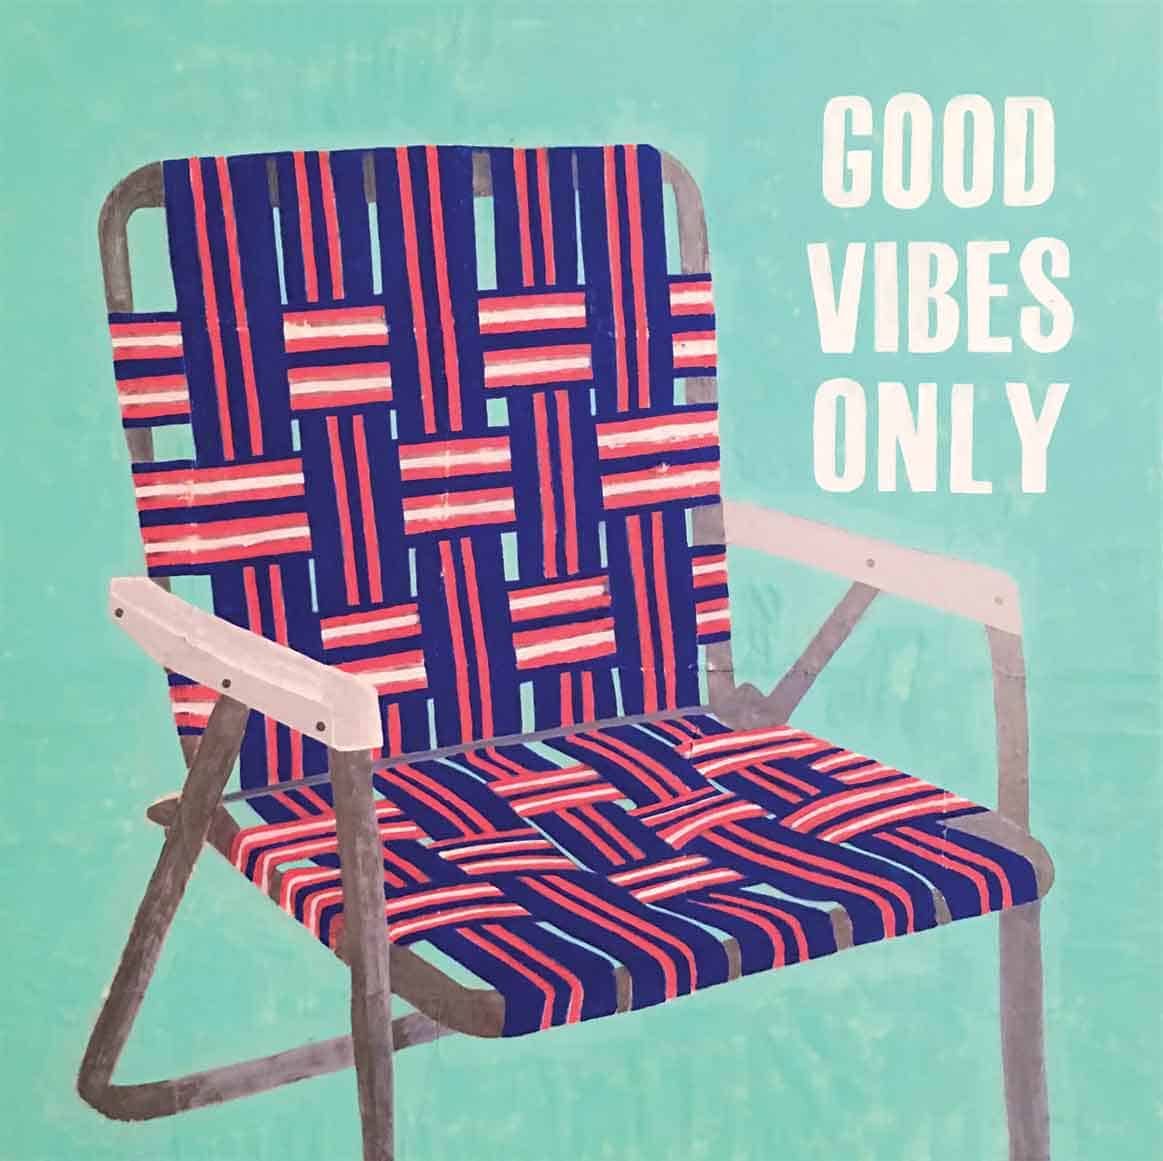 GOOD-VIBES-ONLY